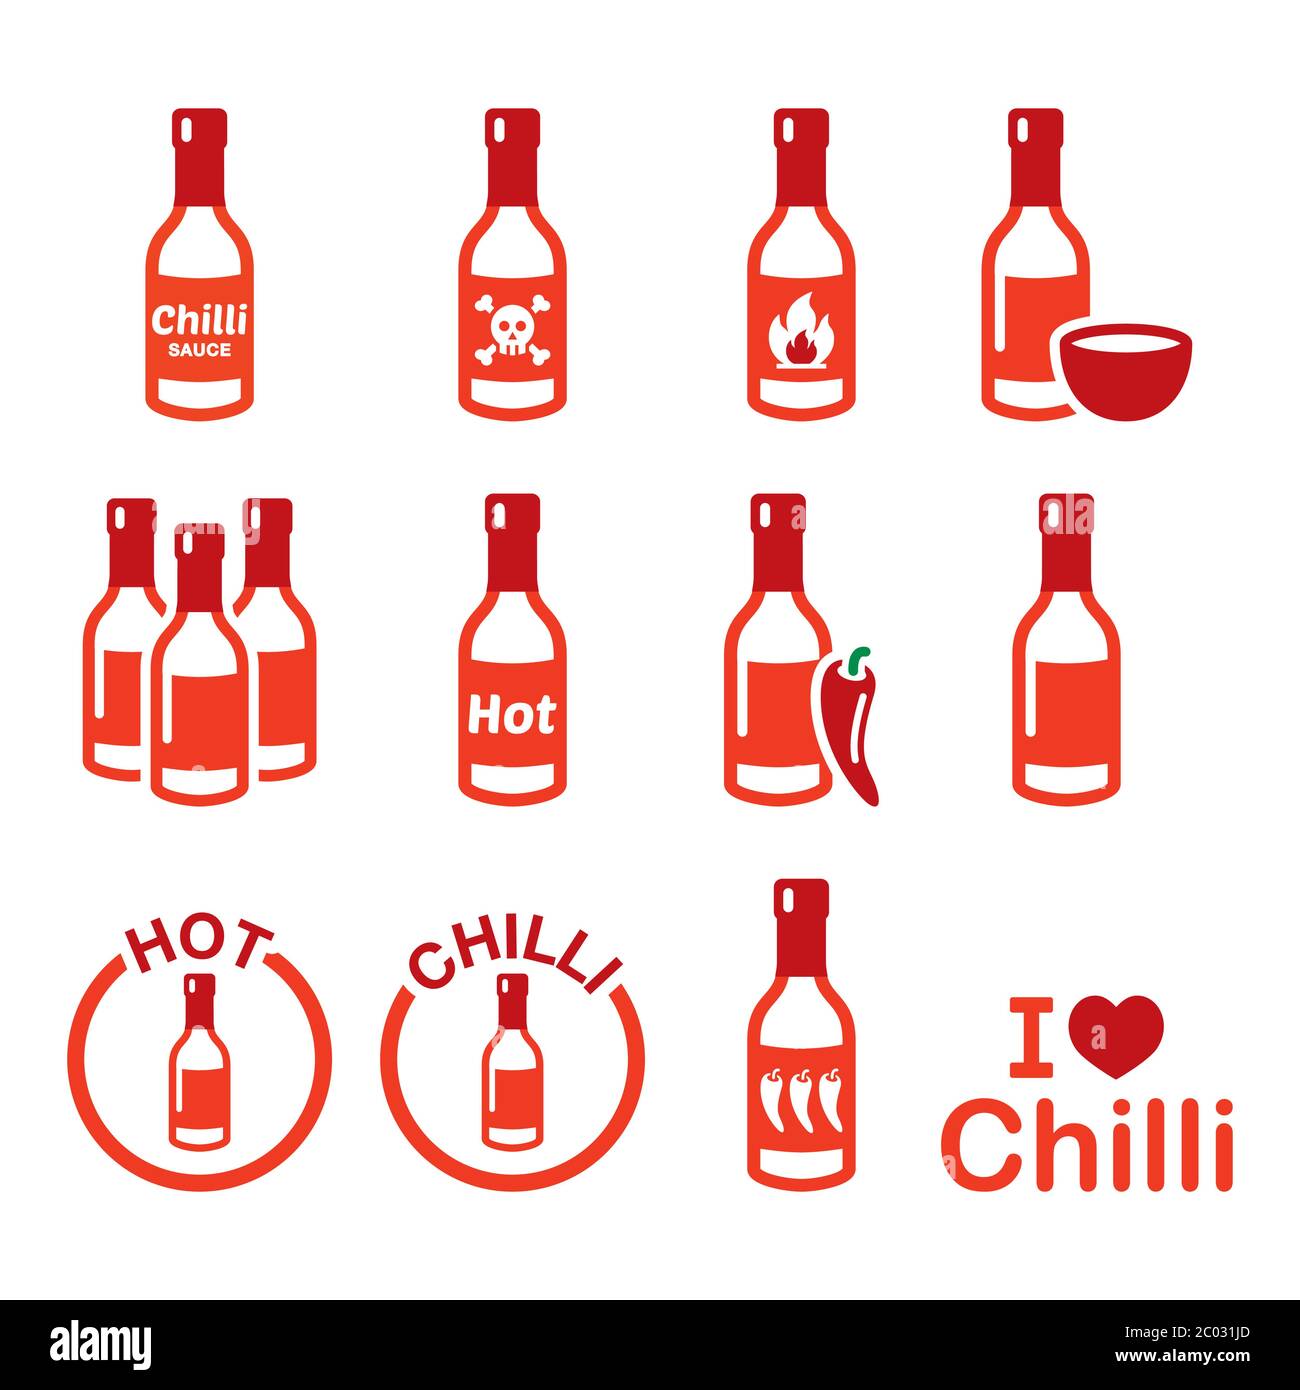 Hot chilli sauce bottle icons set, spicy sauce, Mexican food design Stock Vector